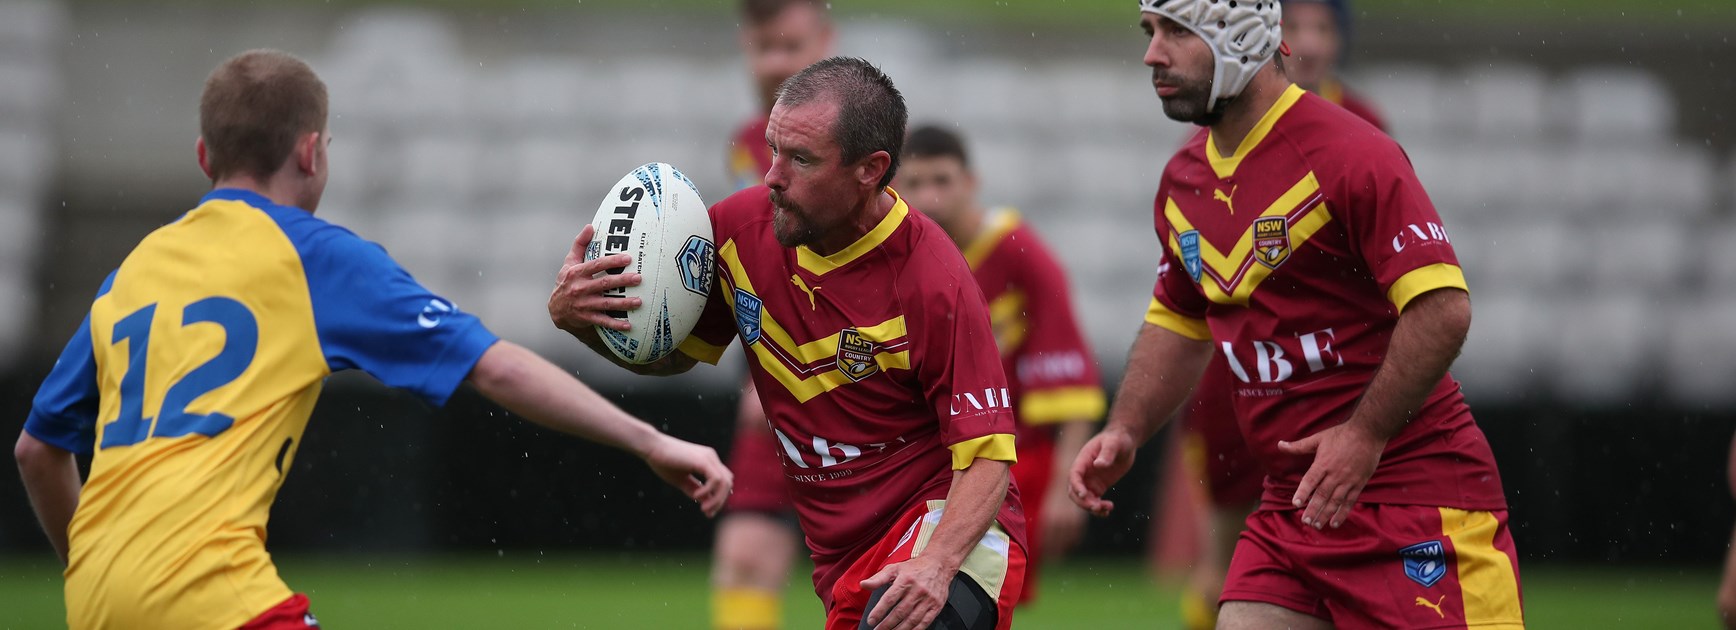 Physical Disability players gearing up for NSW-QLD game